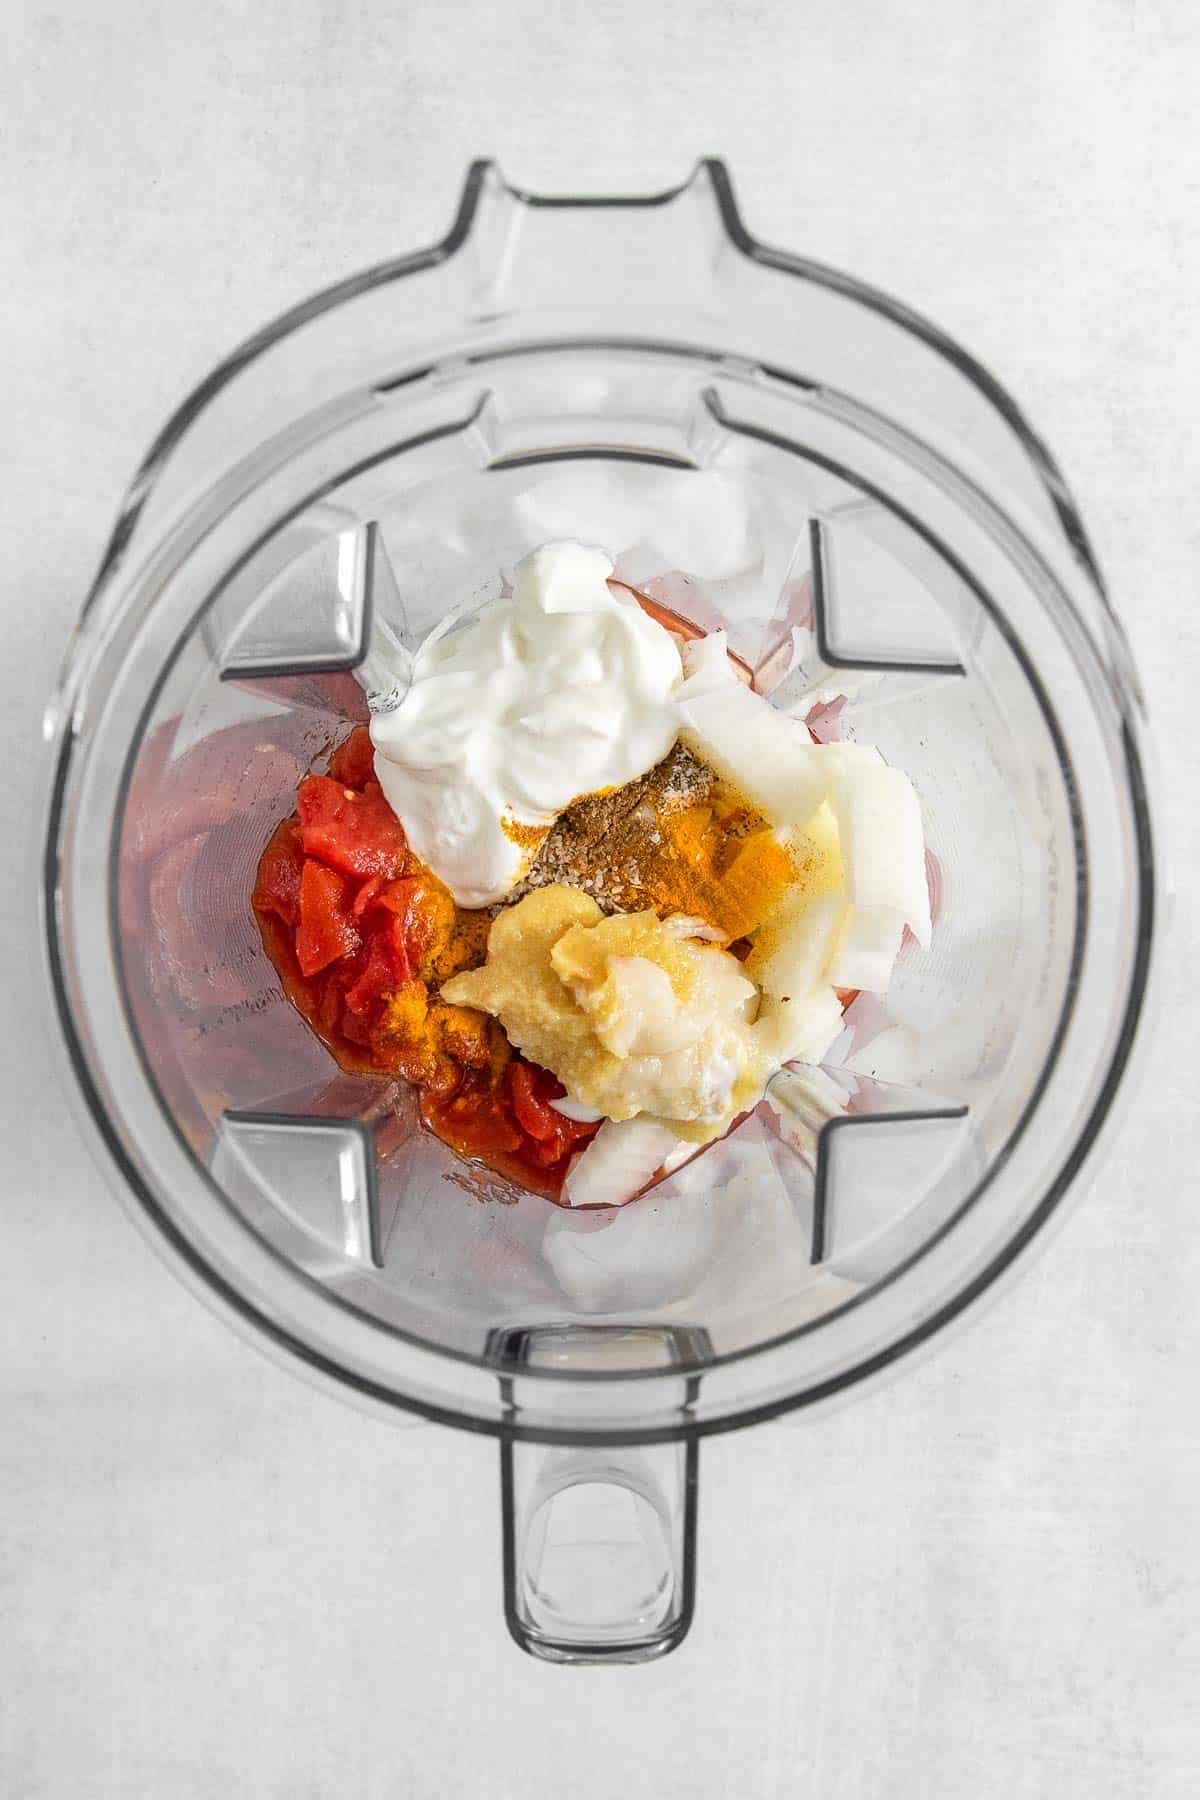 A blender filled with diced tomatoes, yogurt and spices.